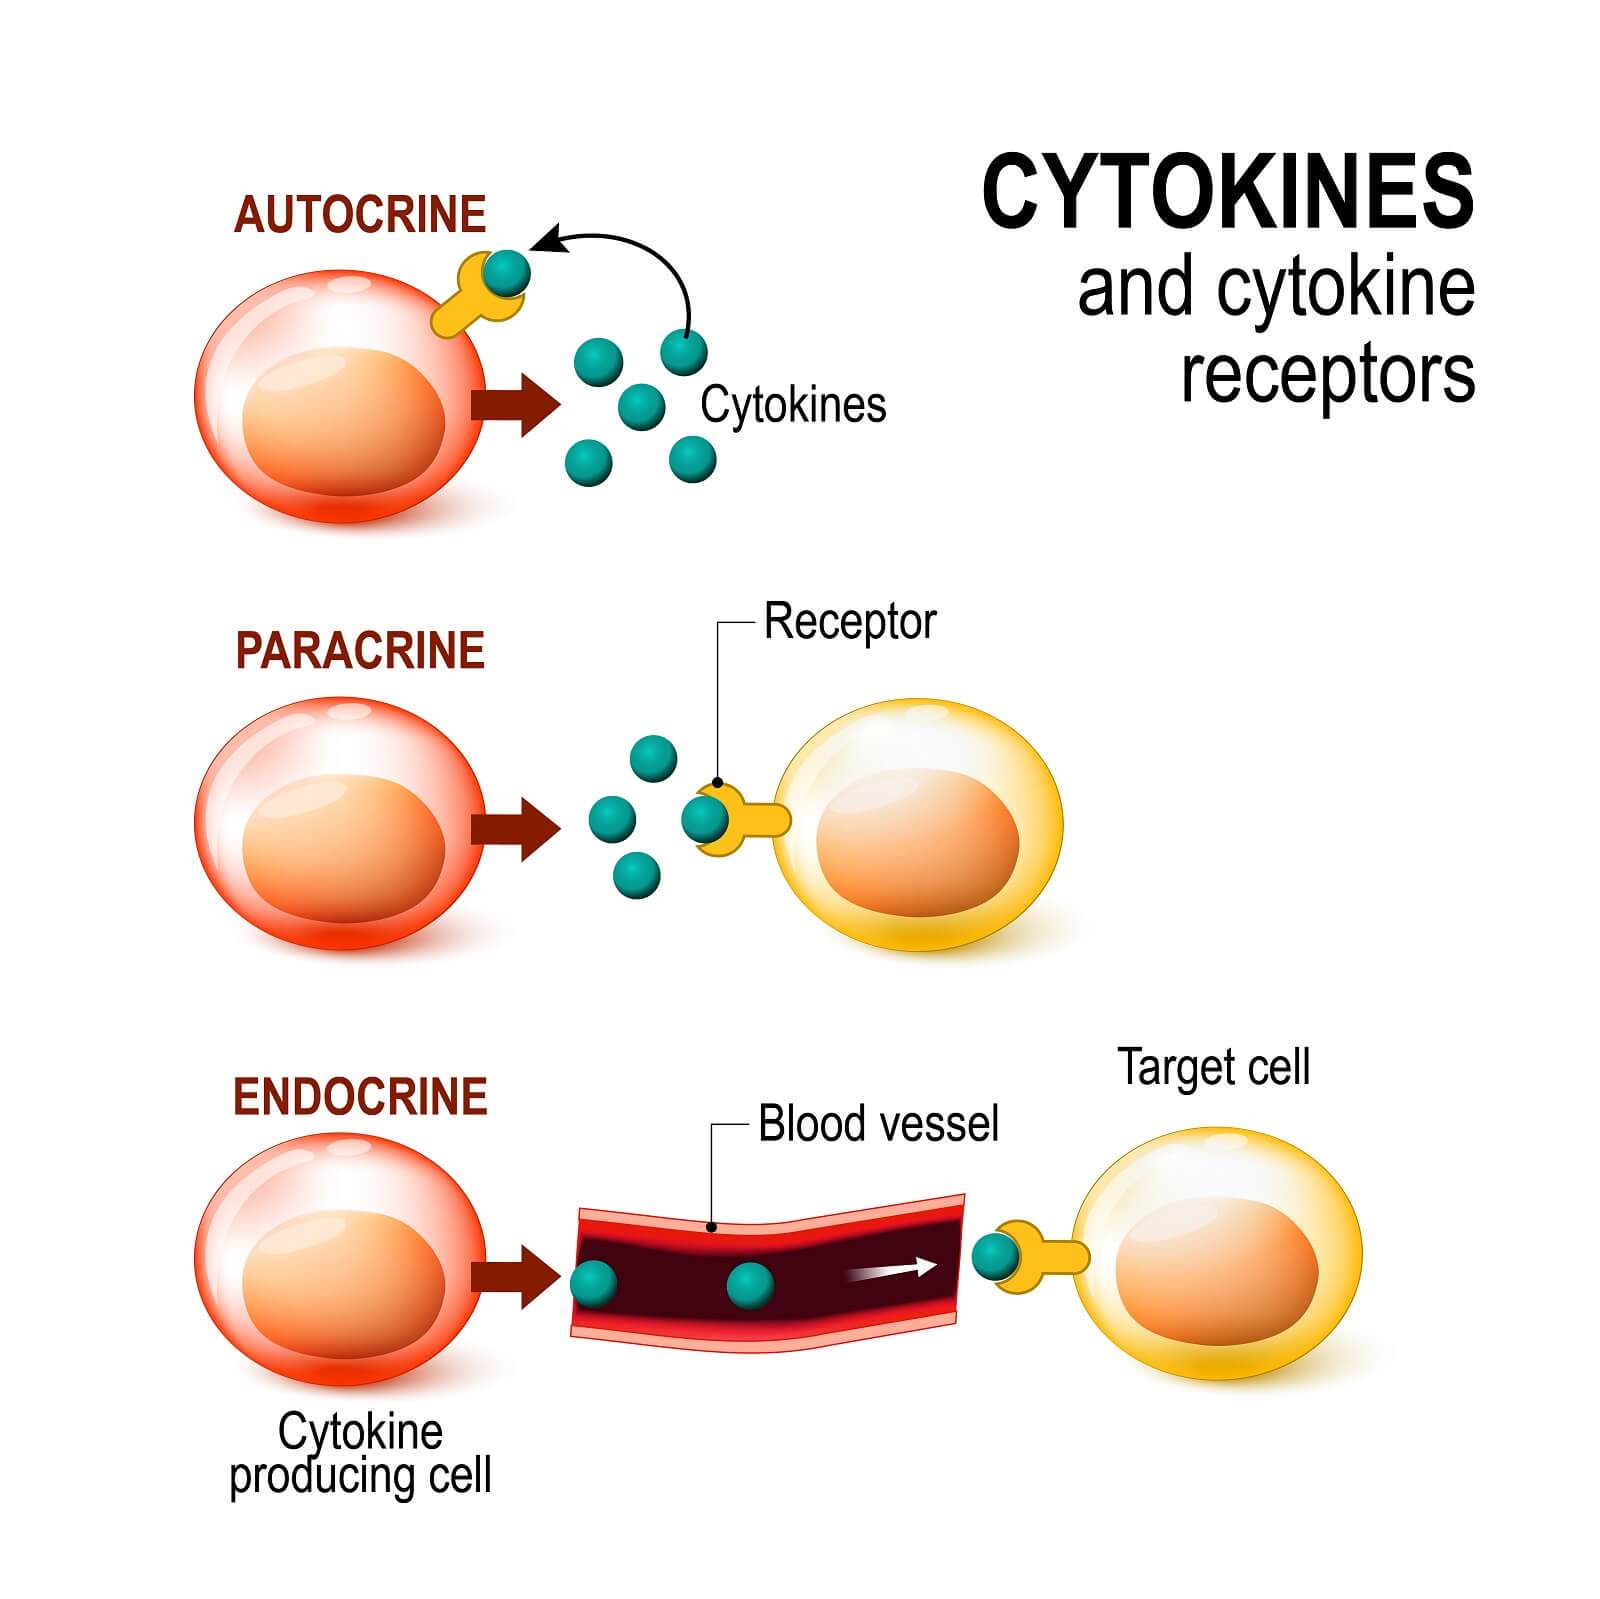 Cytokine receptor and signal transduction between cells simplified diagram.